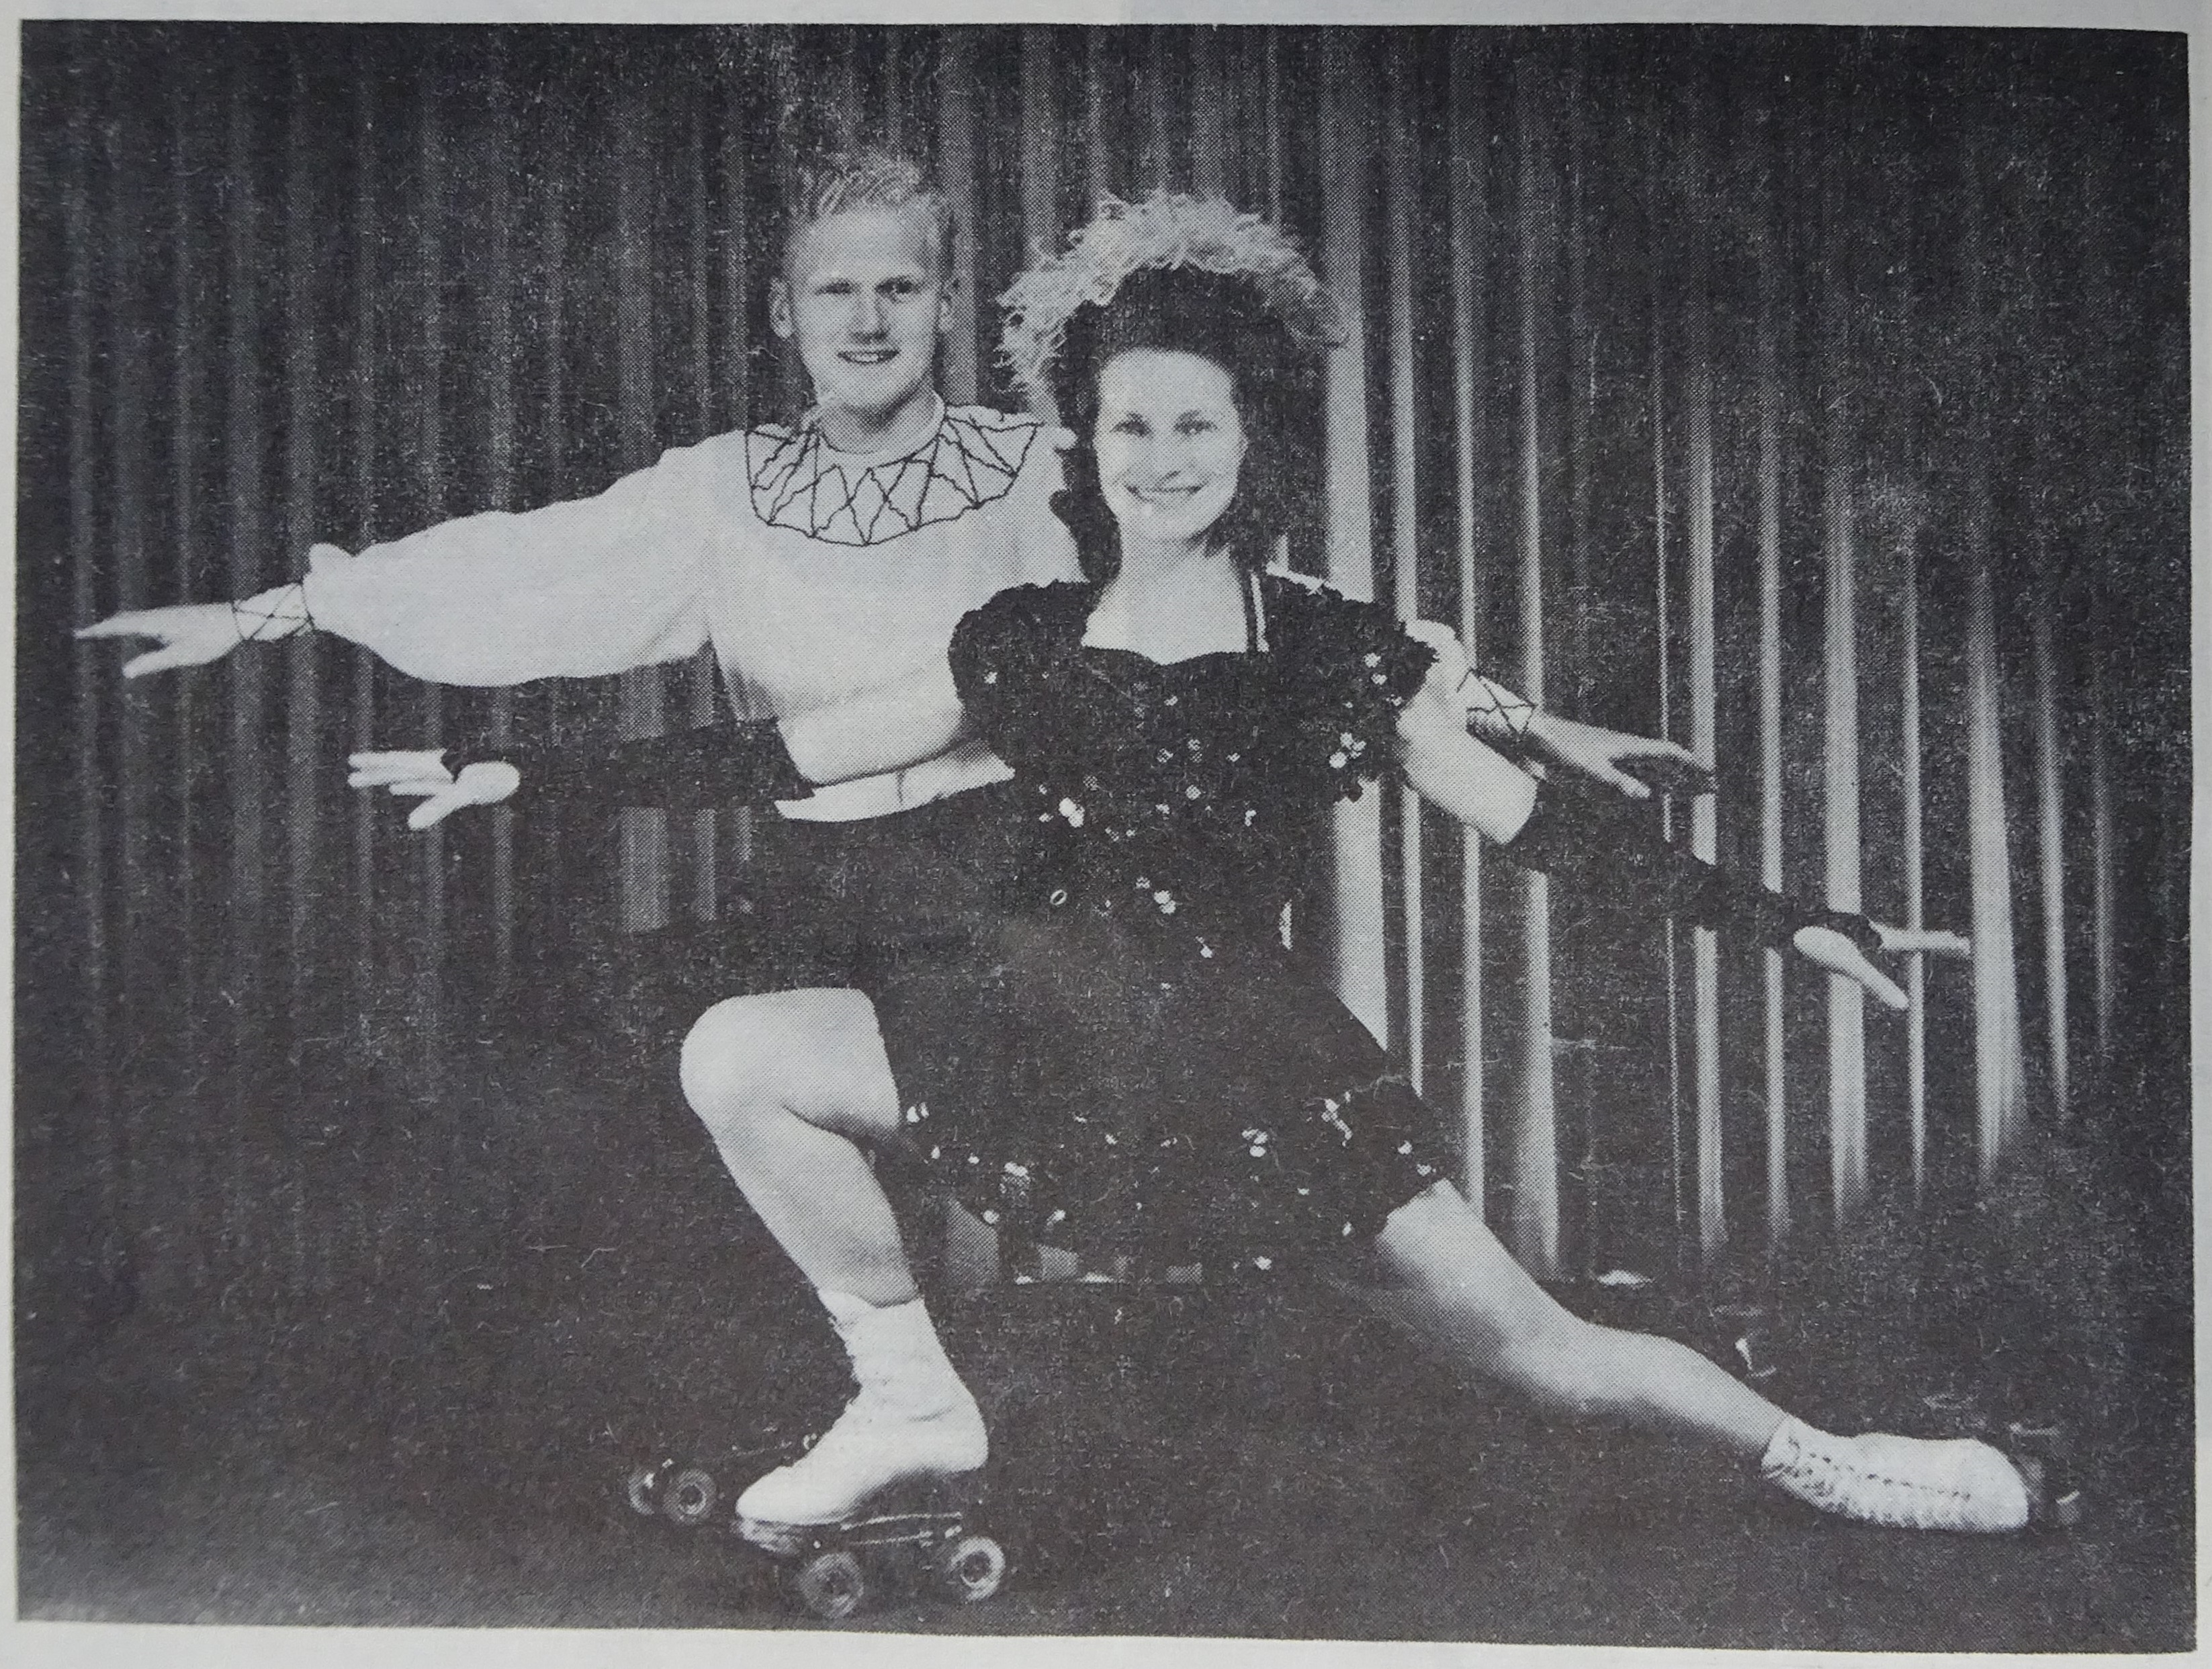 Joyce and Sandy Allchurch of Christchurch were the Pair and Dance Skating Champions of New Zealand from 1943–1949. Canterbury Museum E.C.174.537